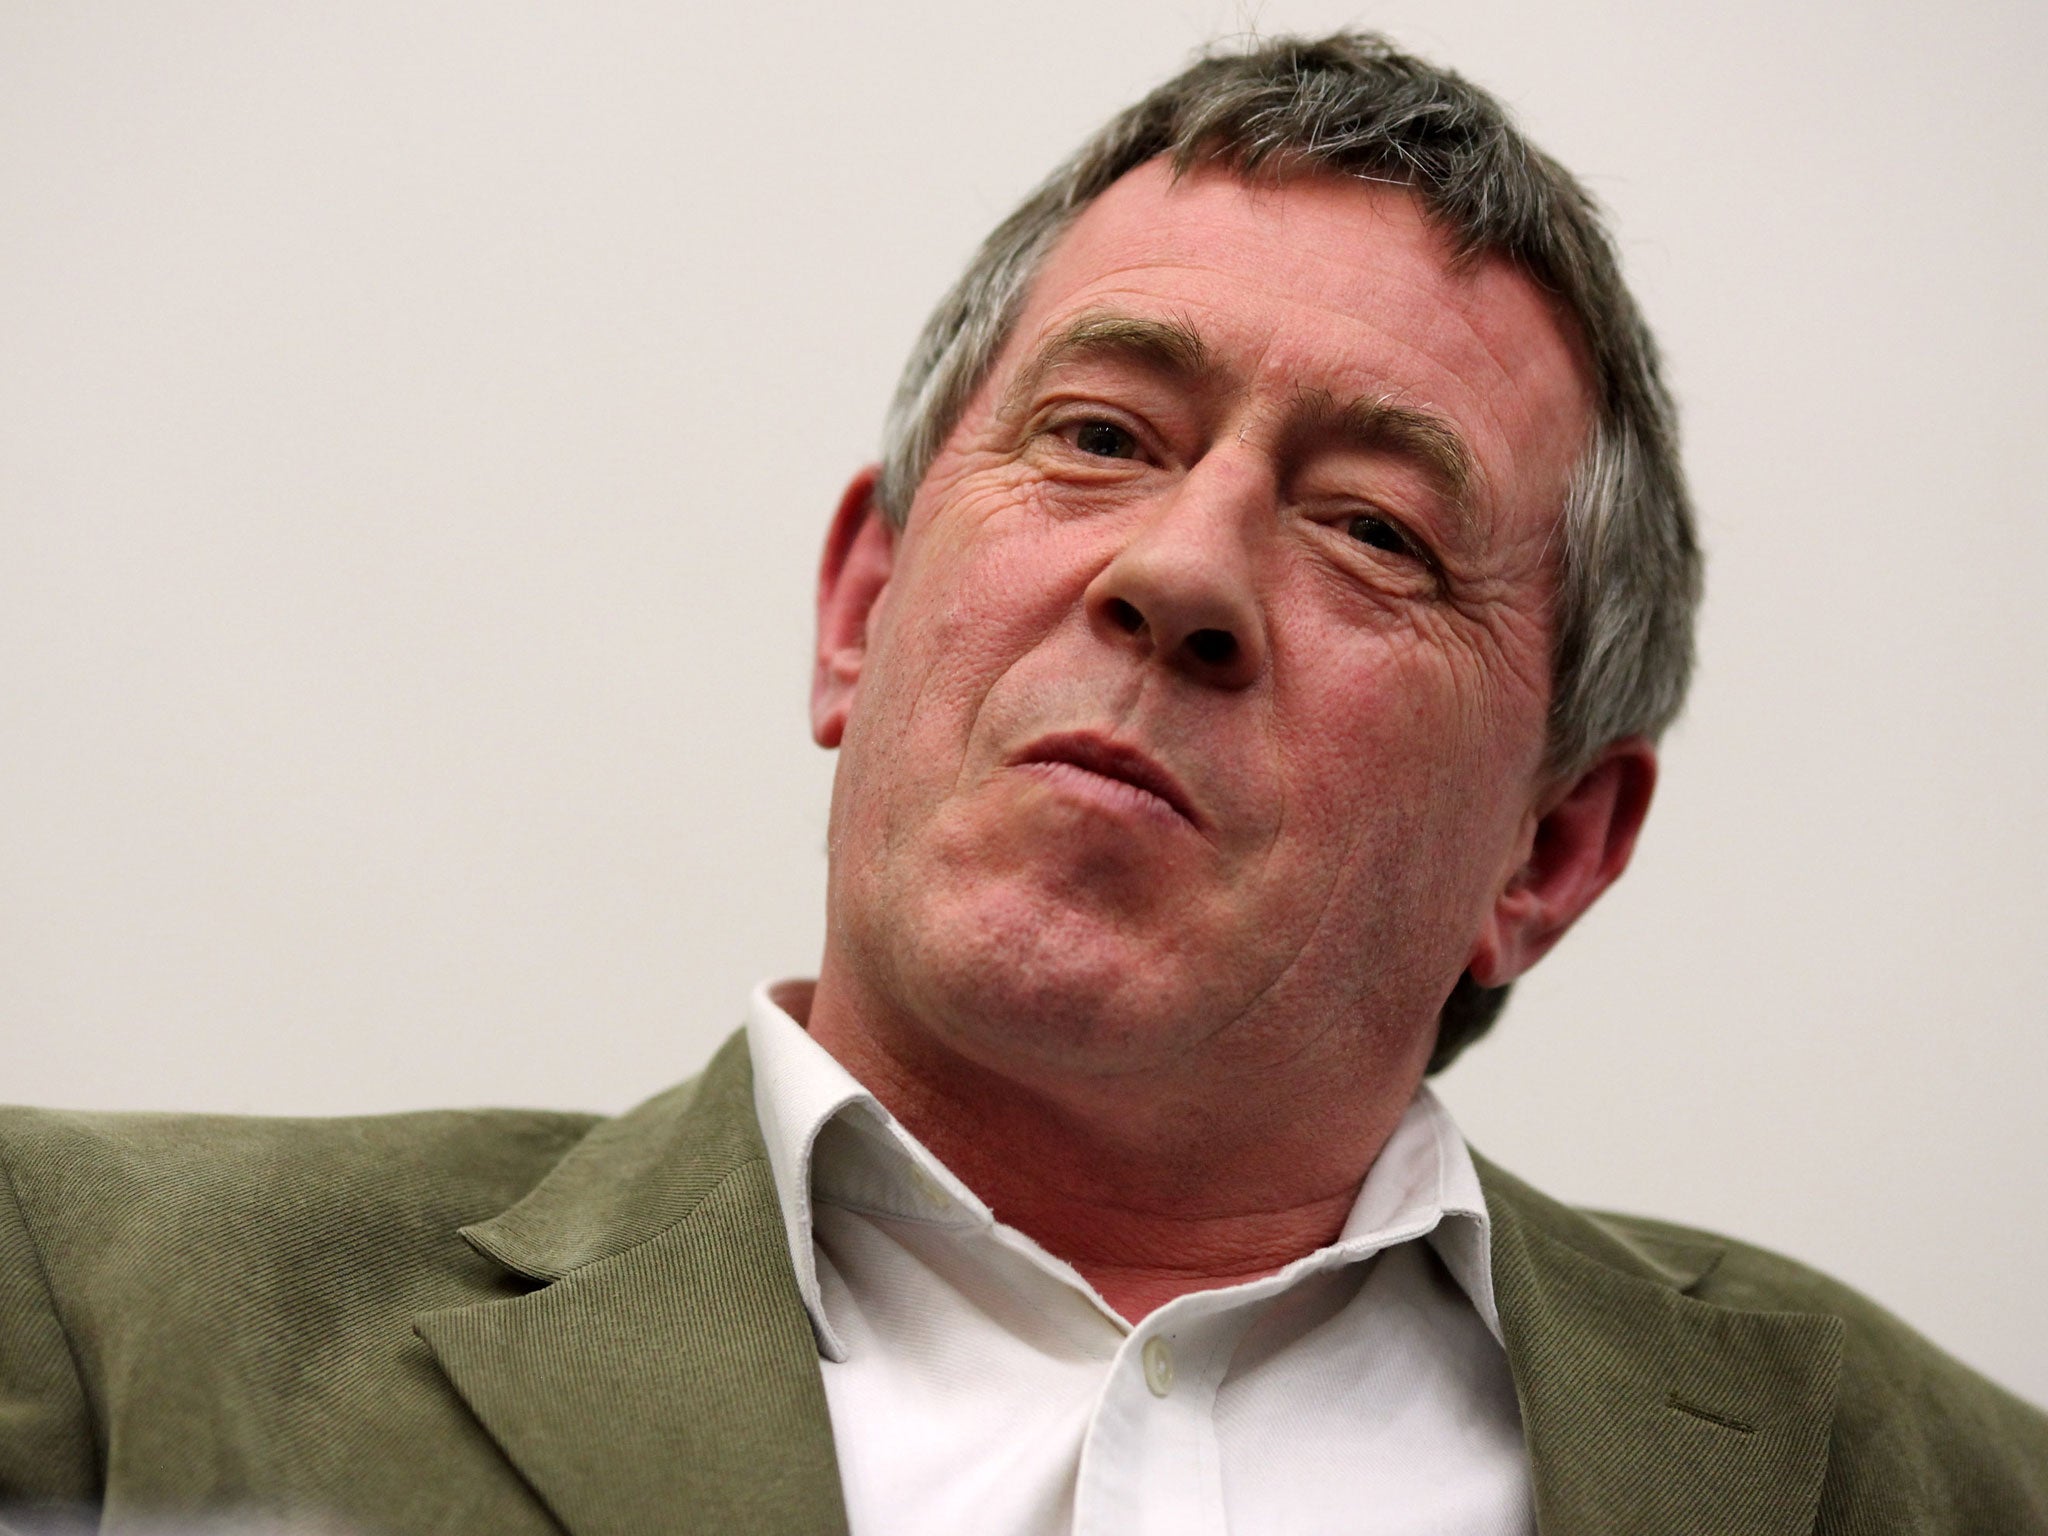 Labour’s former Universities minister, John Denham, will accuse the Government of being 'scandalously irresponsible' in its handling of the higher-education debate